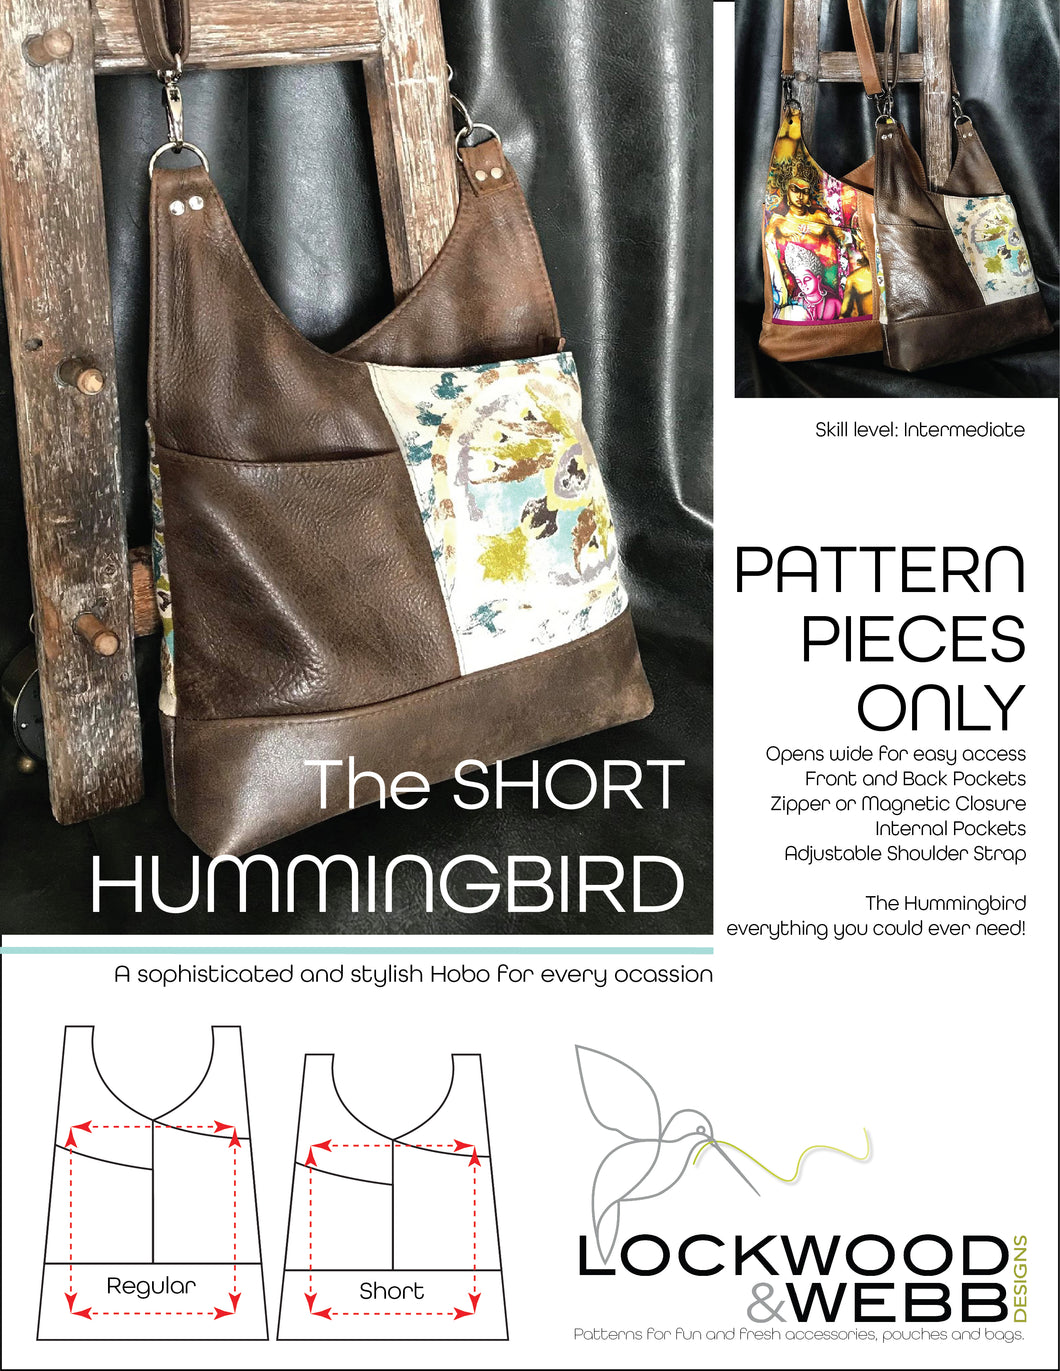 The Hummingbird Hobo SHORT - PATTERN PIECES Only